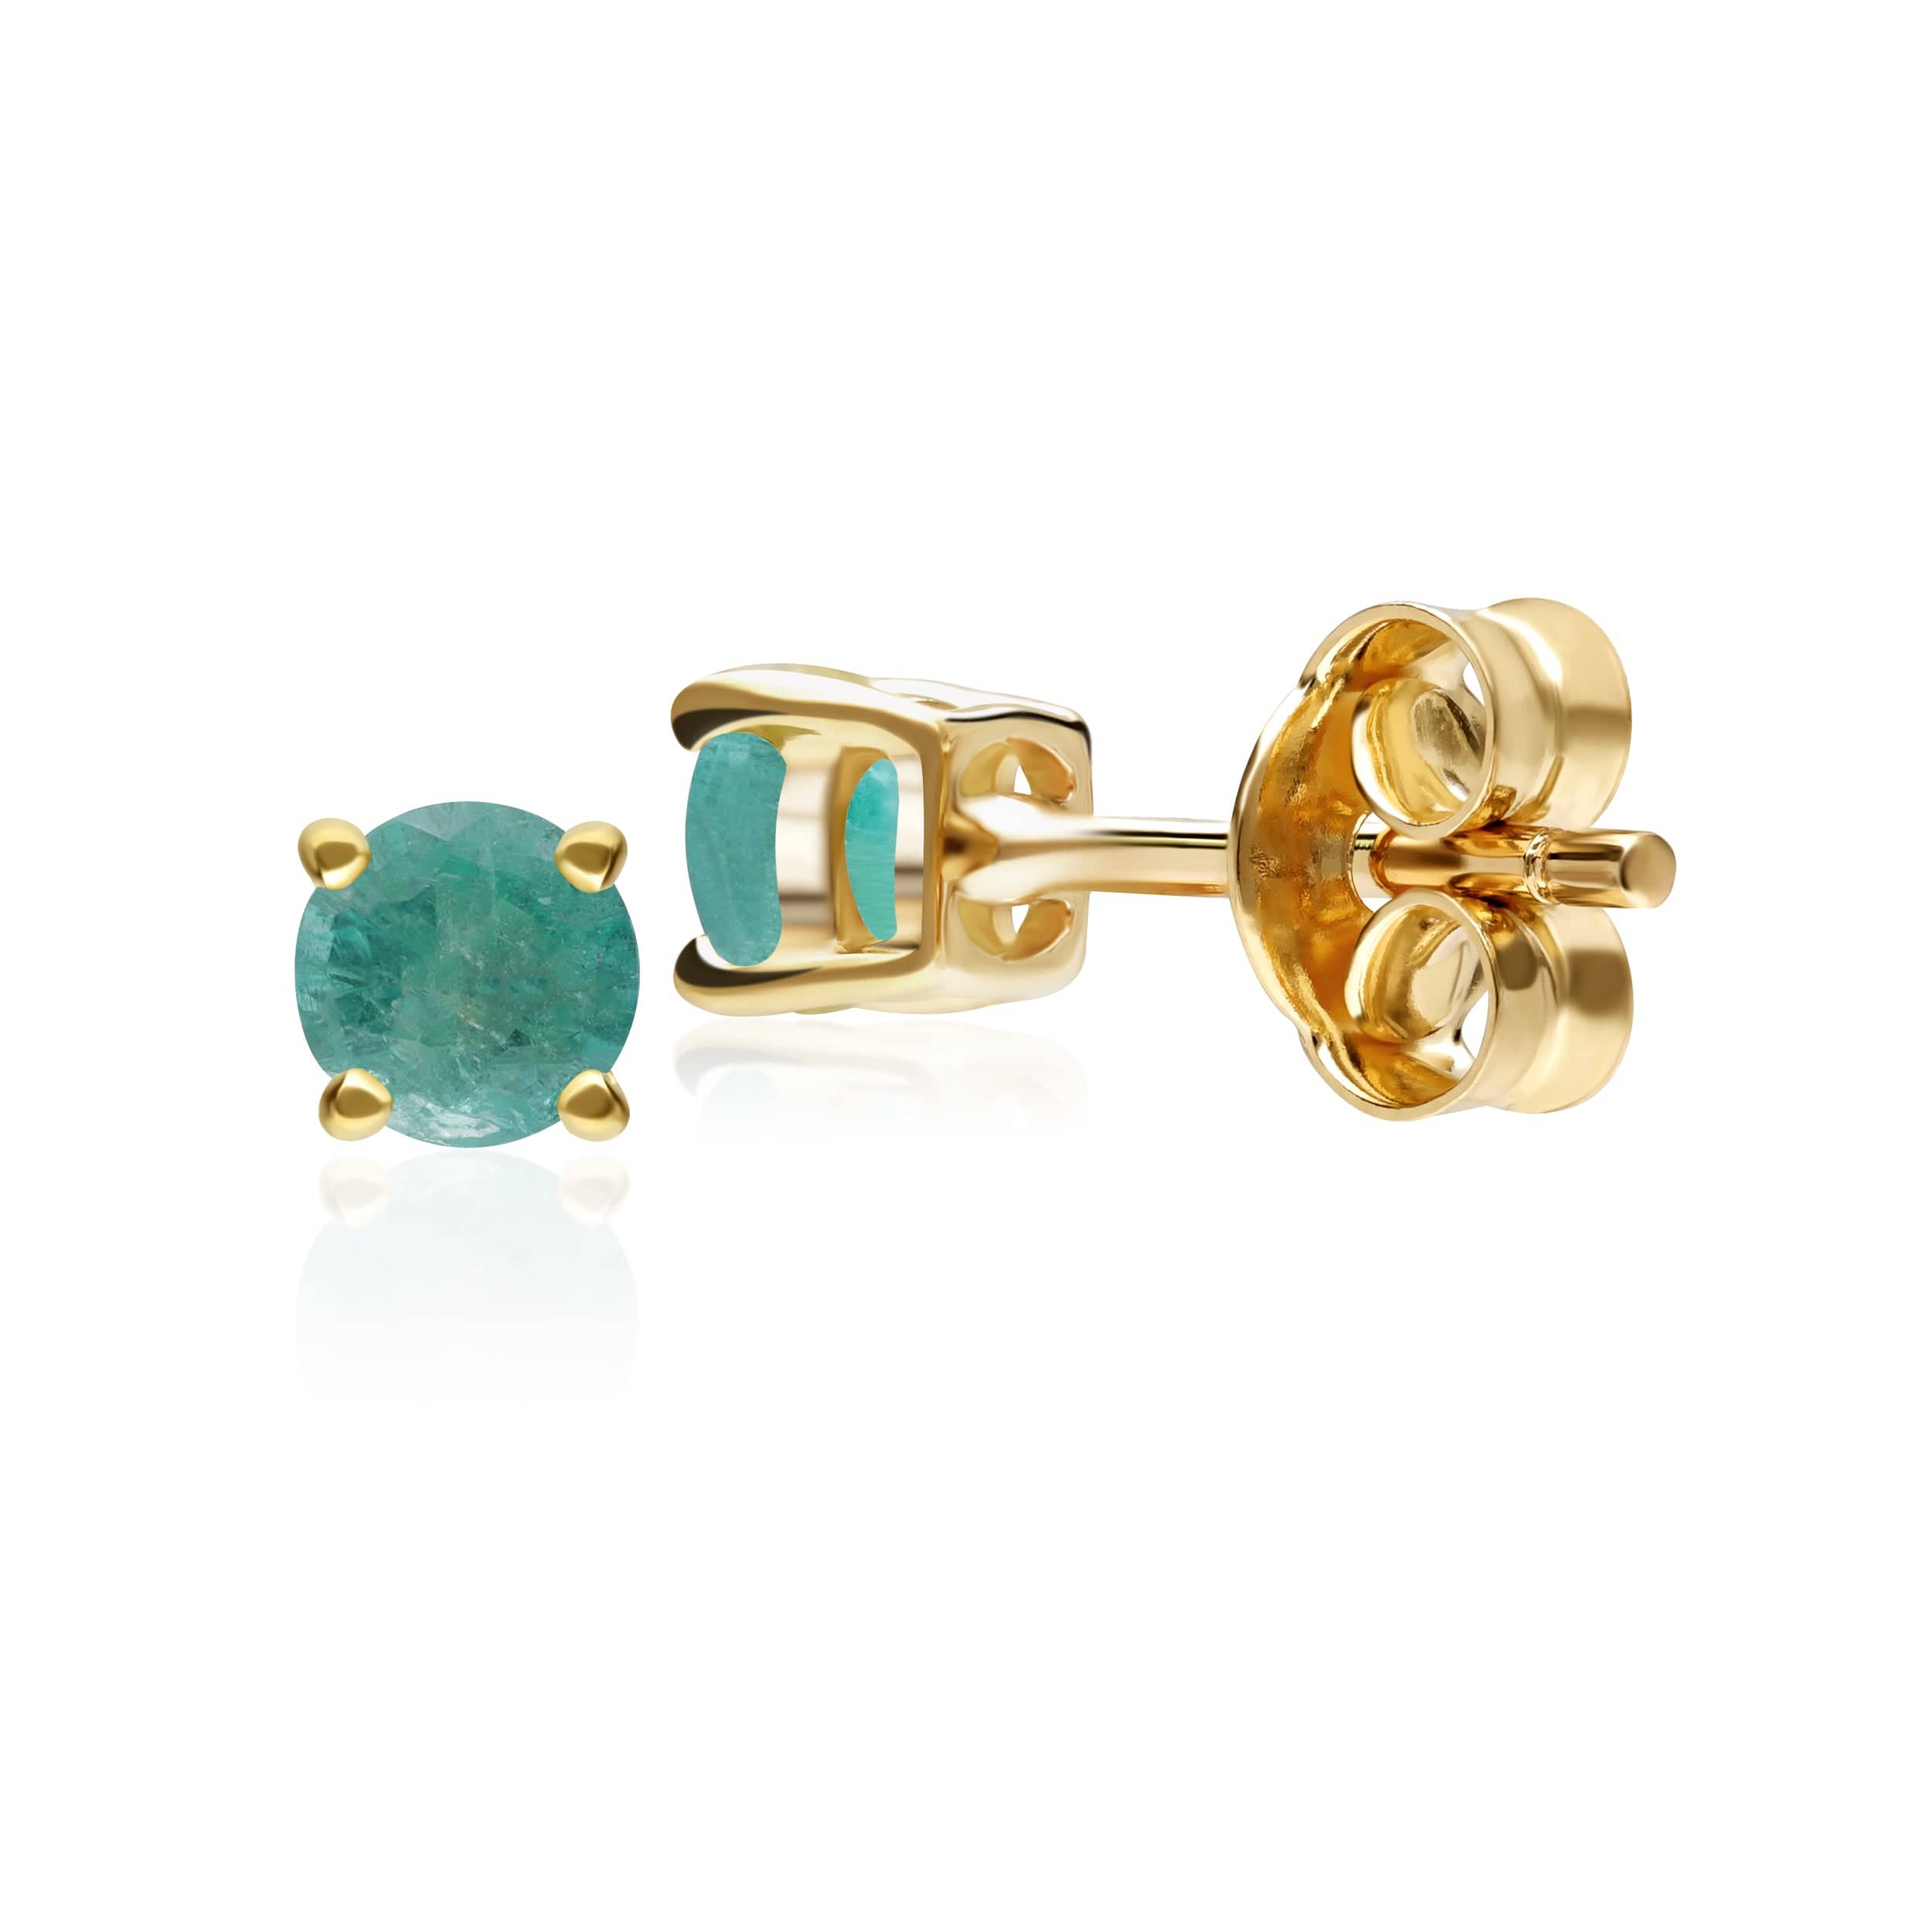 11569 Classic Round Emerald Stud Earrings in 9ct Yellow Gold 3.5mm 3